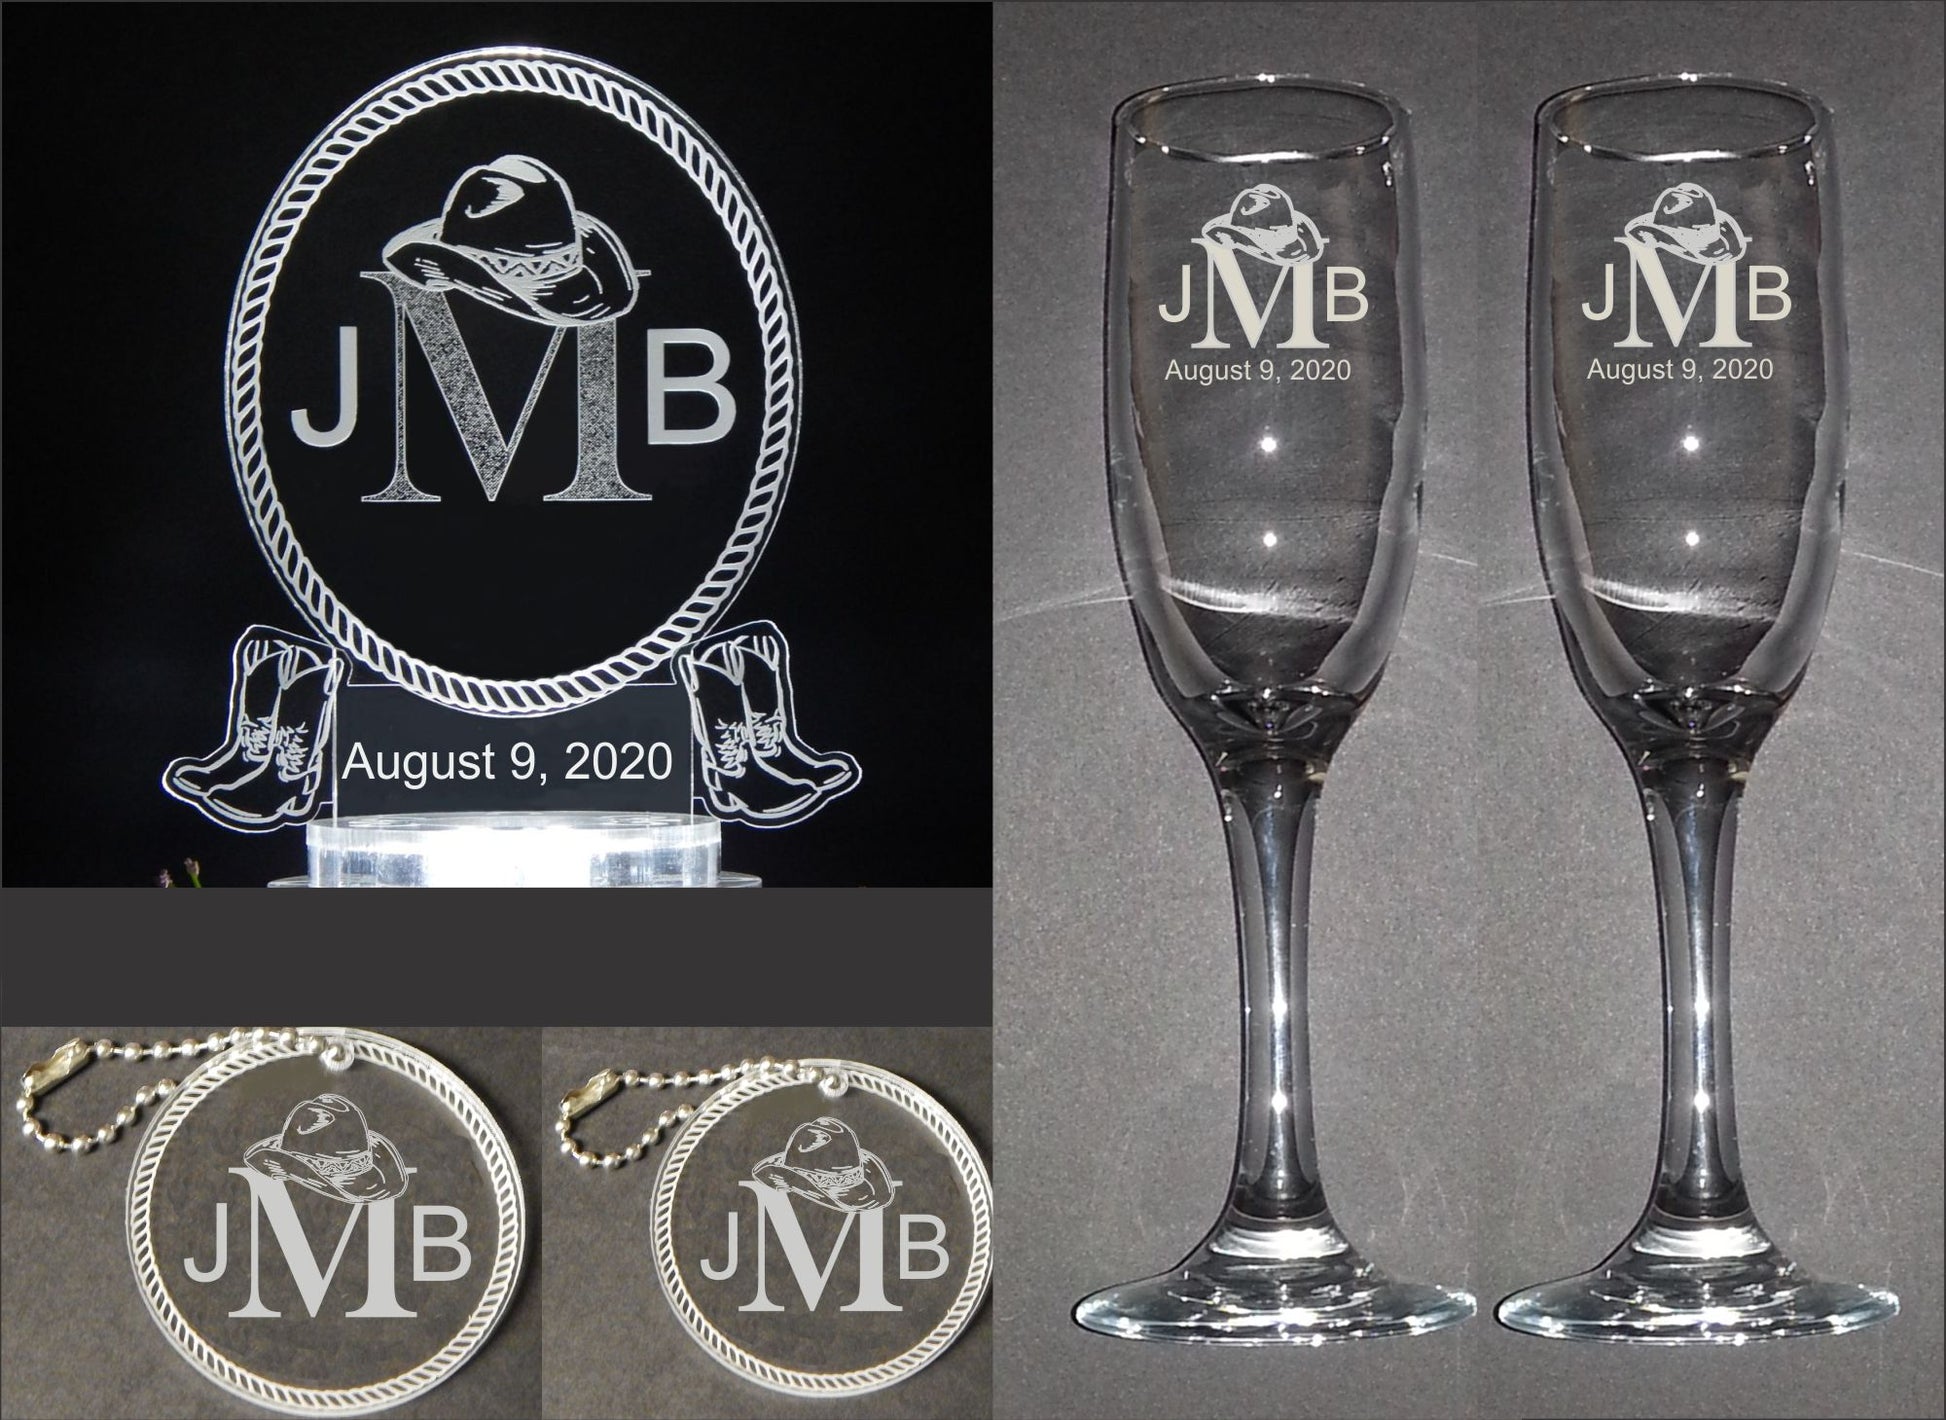 photo showing clear acrylic oval western themed cake topper along with 2 sizes of matching round keychain favors and a set of two champange flutes, all engraved with a 3 letter monogram